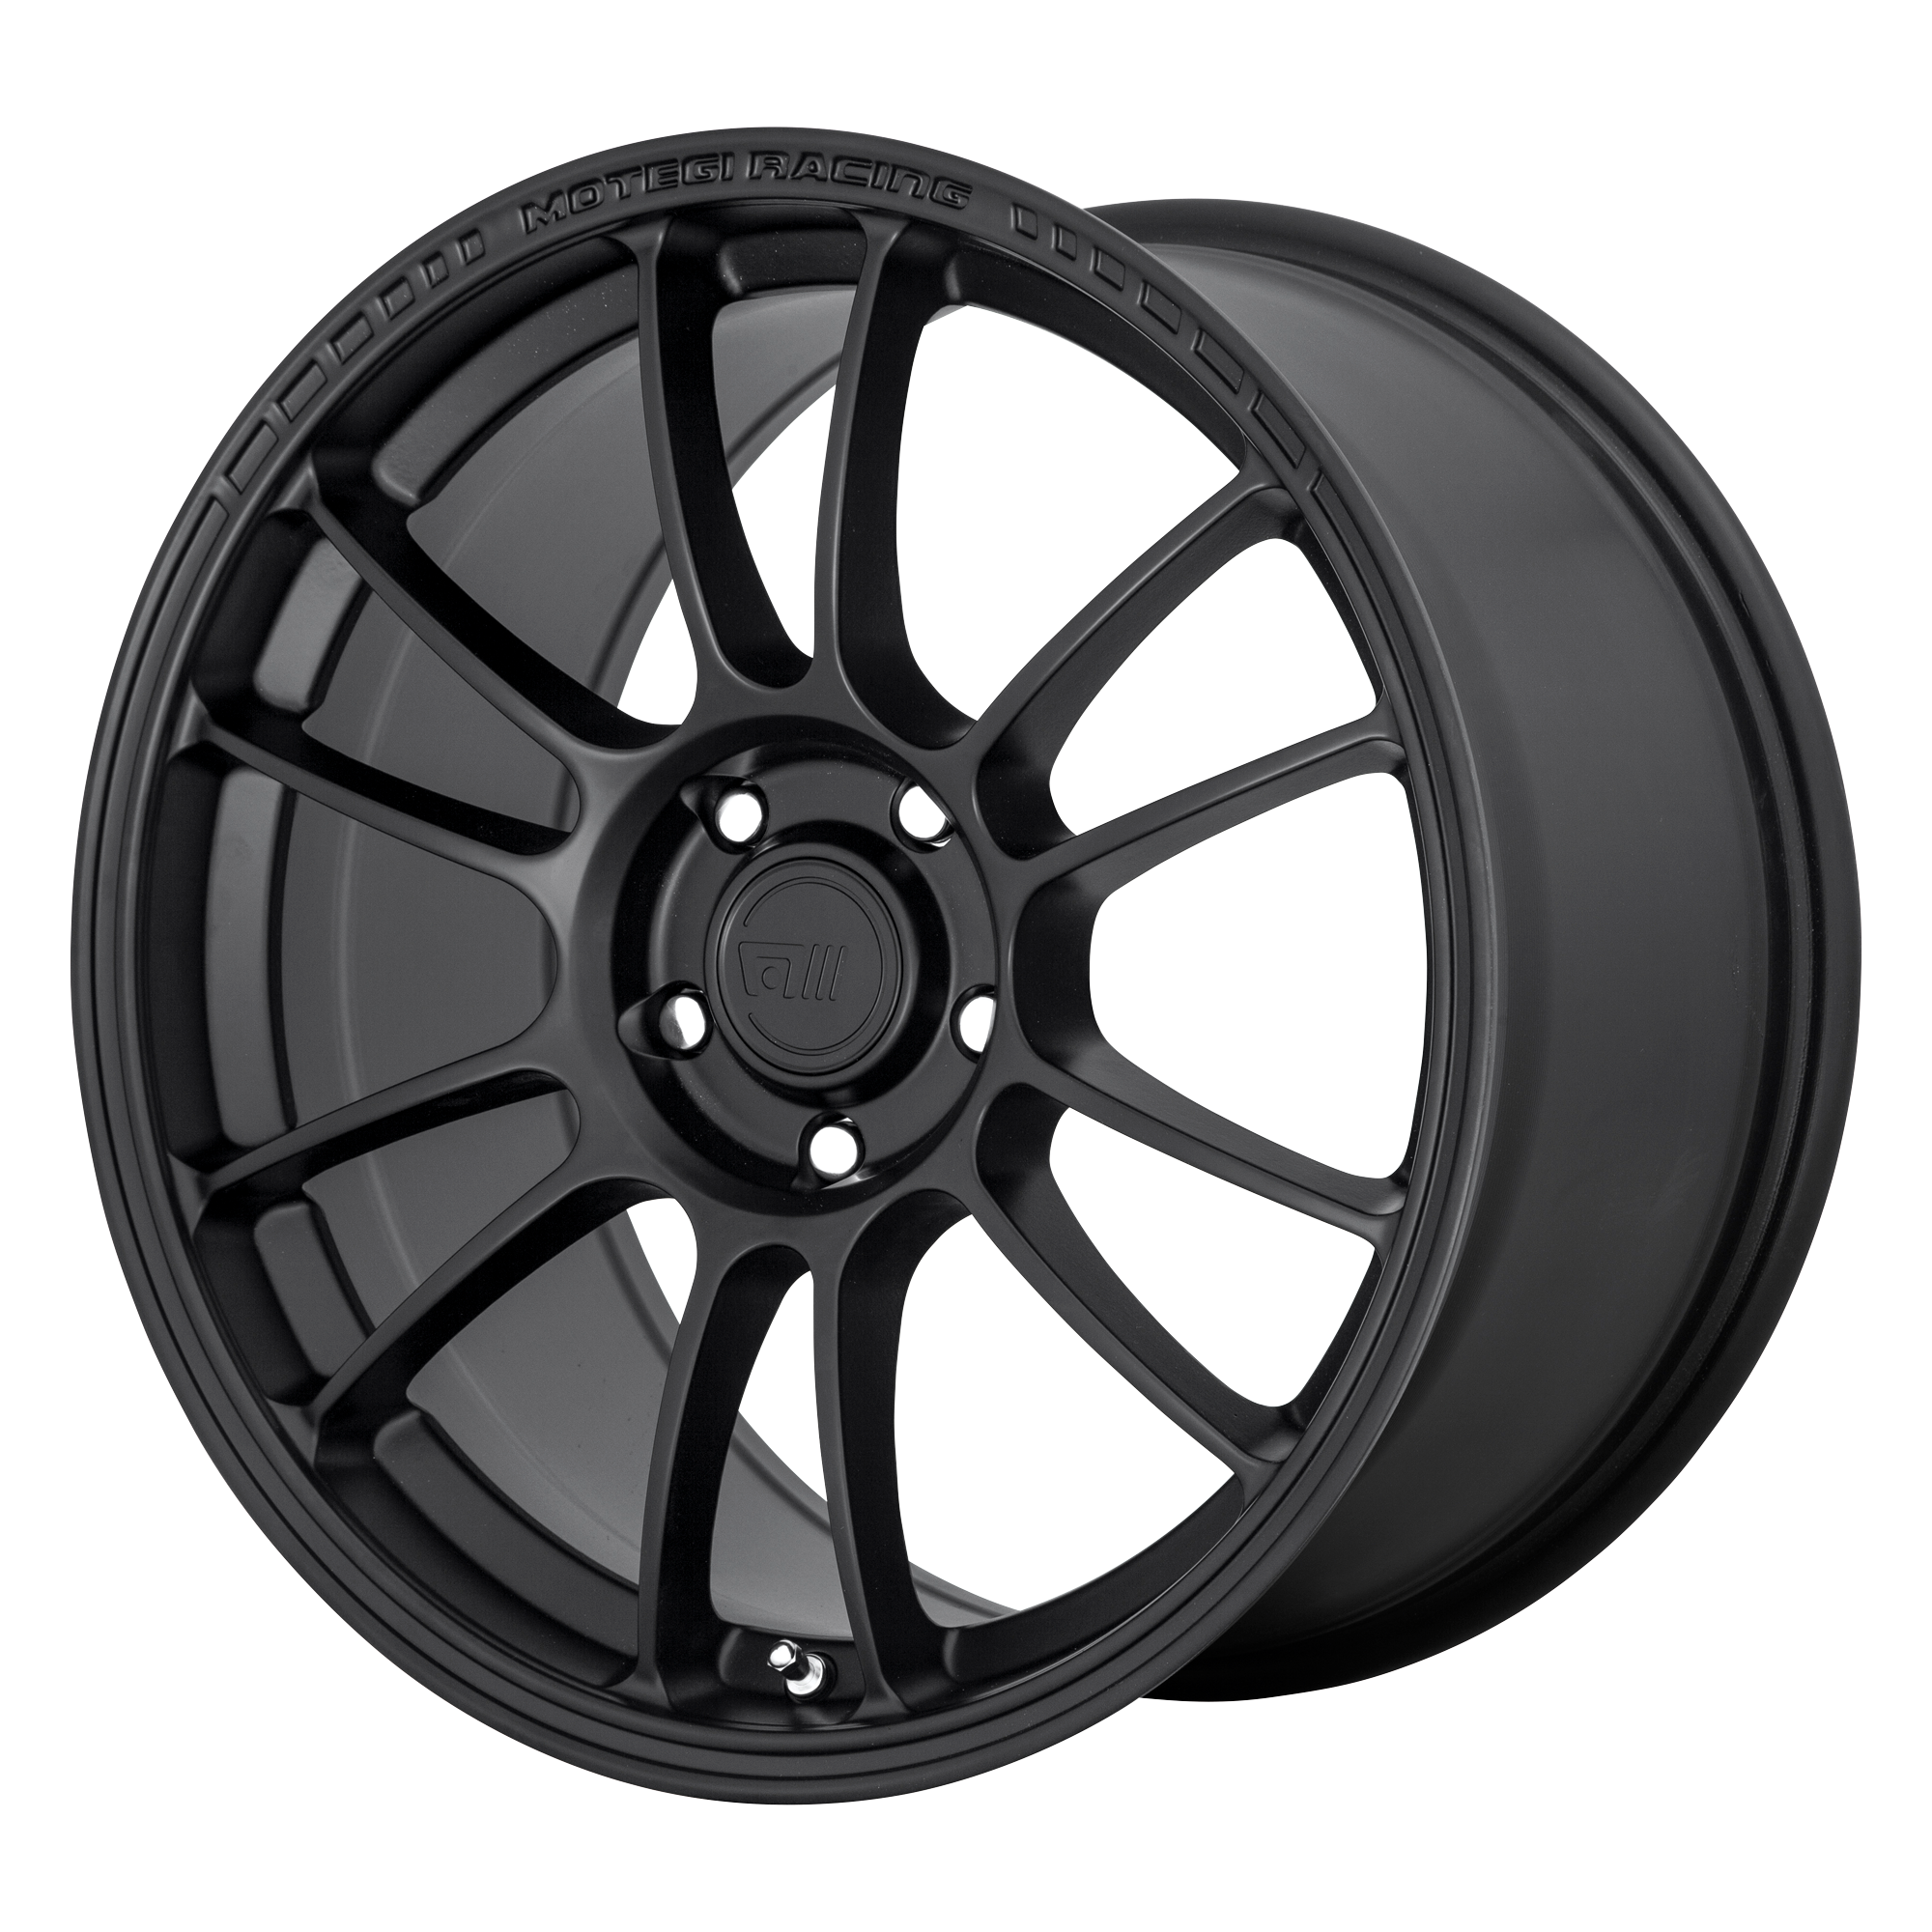 SS6 18x9.5 5x114.30 SATIN BLACK (45 mm) - Tires and Engine Performance